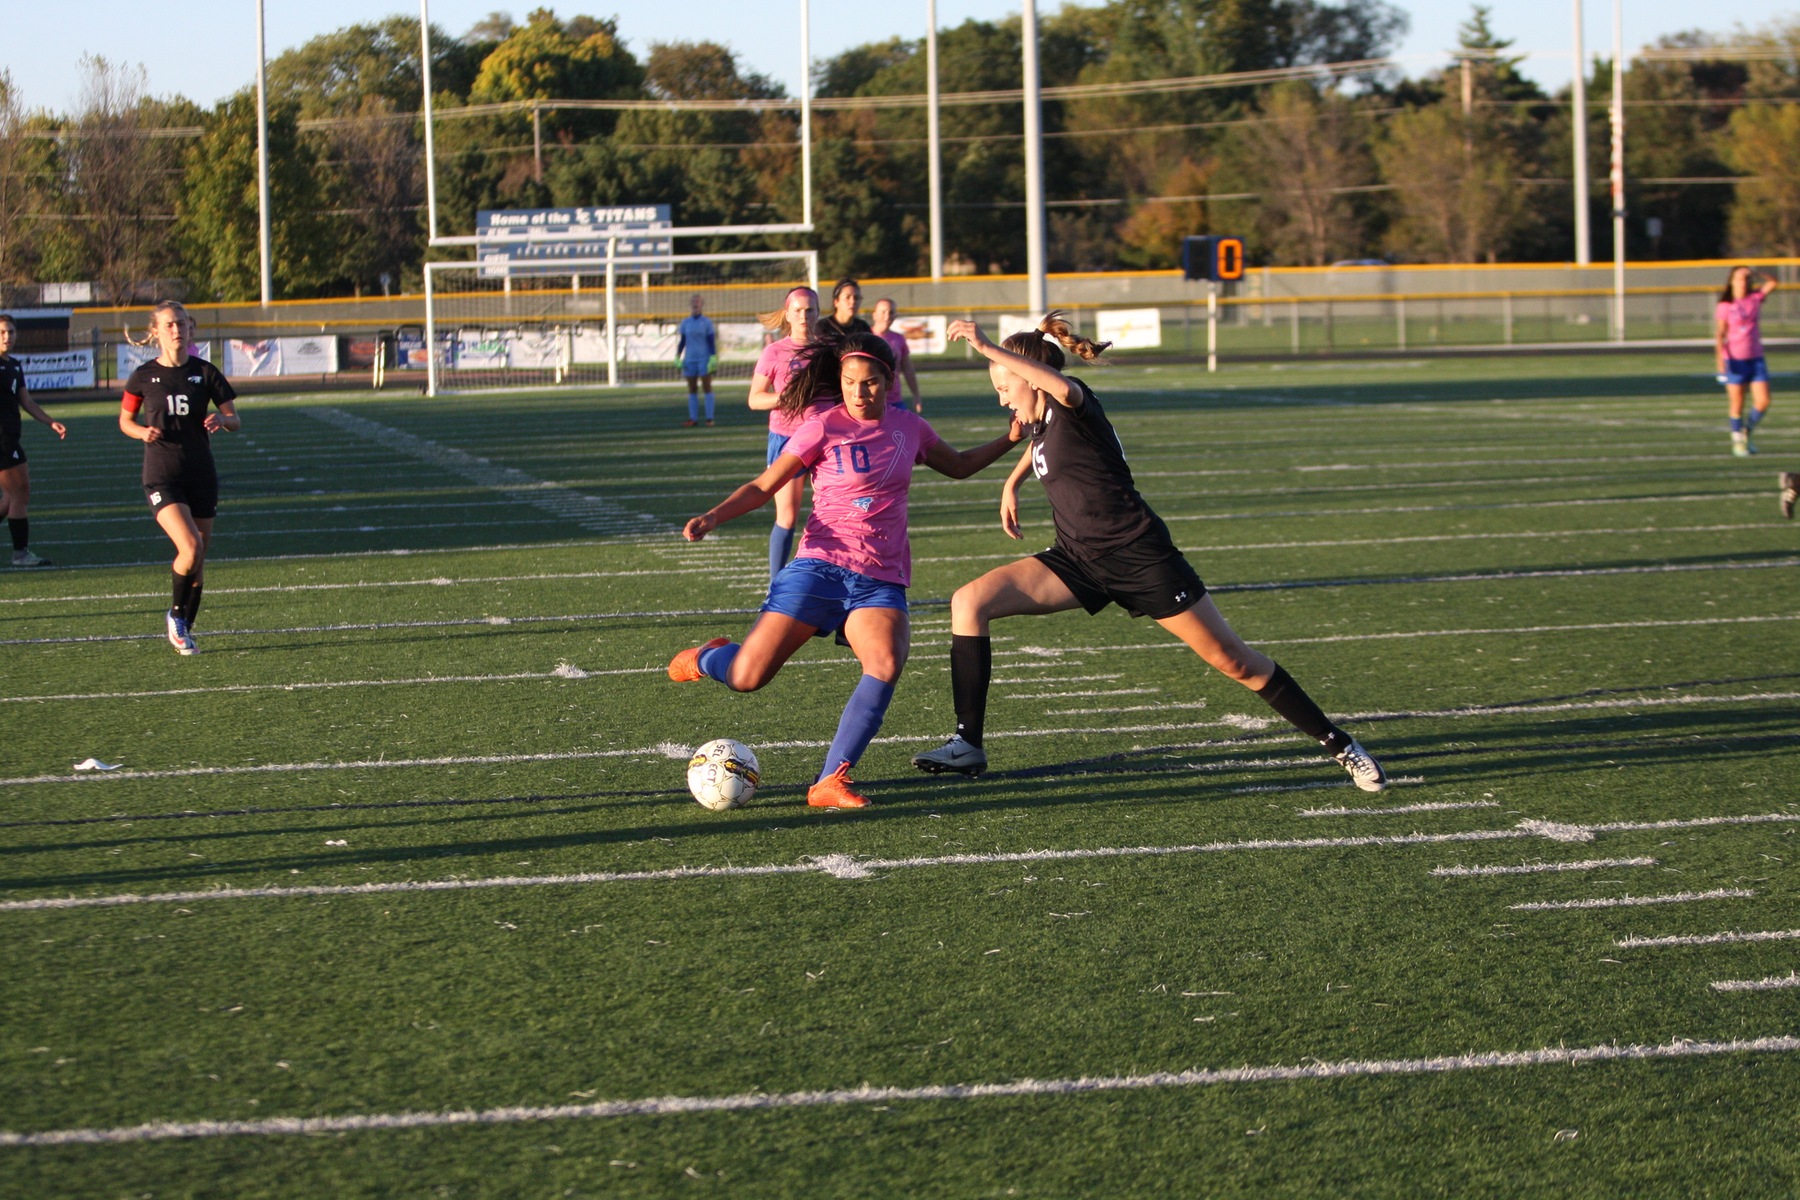 Laura Chavez earned two assists in Iowa Western's 2-1 victory over St. Charles CC Thursday night in Kansas City.